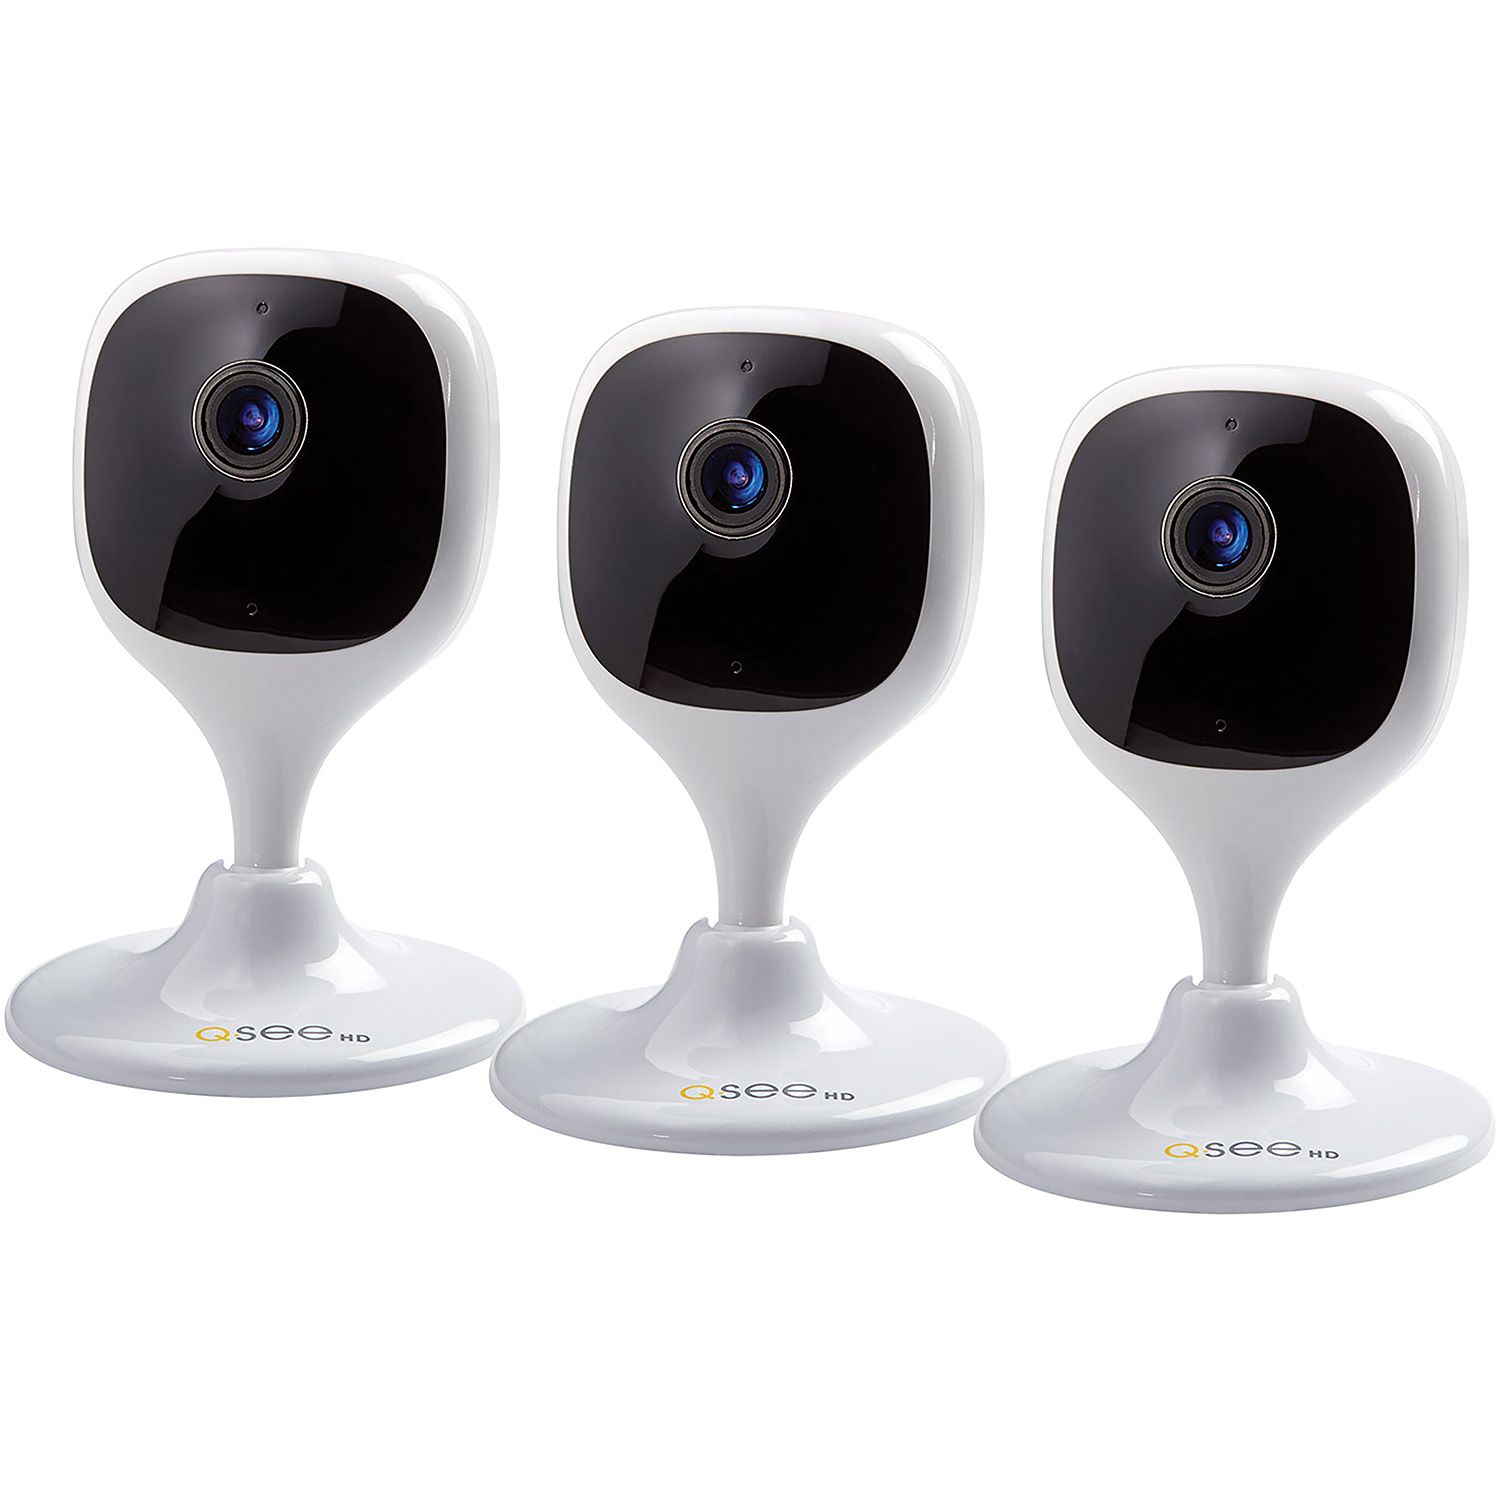 Q-See 1080P Wi-Fi Cube Security Camera – 3 Pack